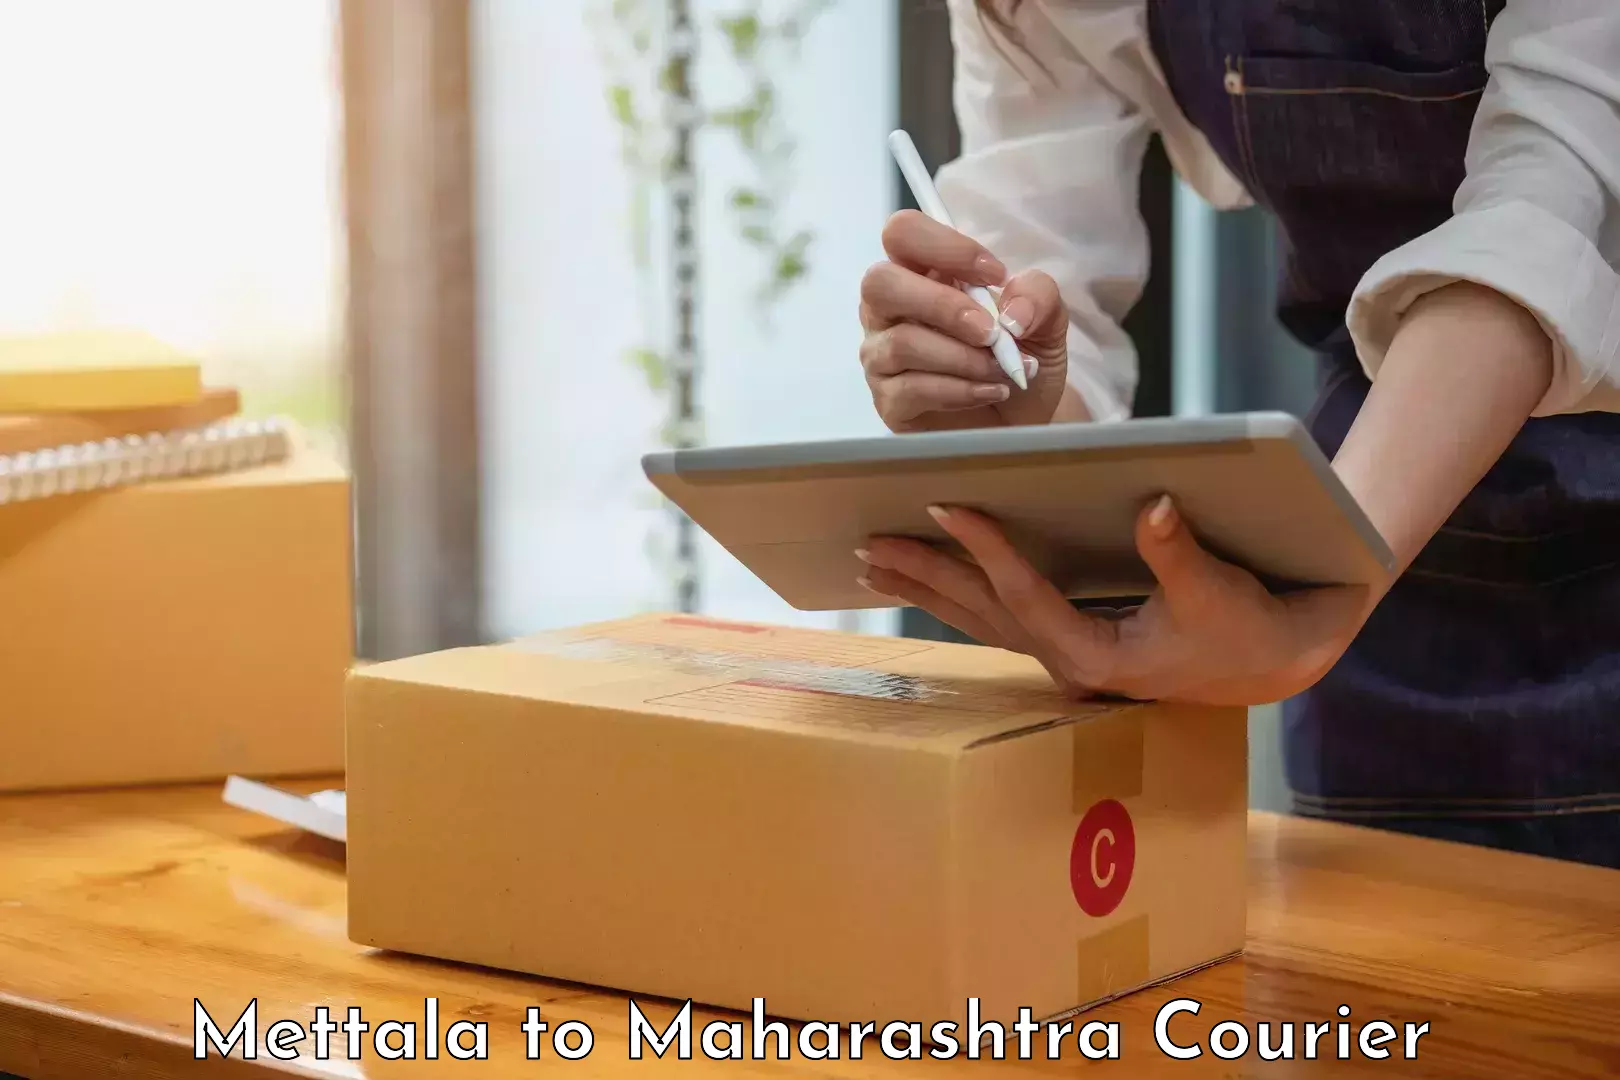 Courier service comparison Mettala to Dhamangaon